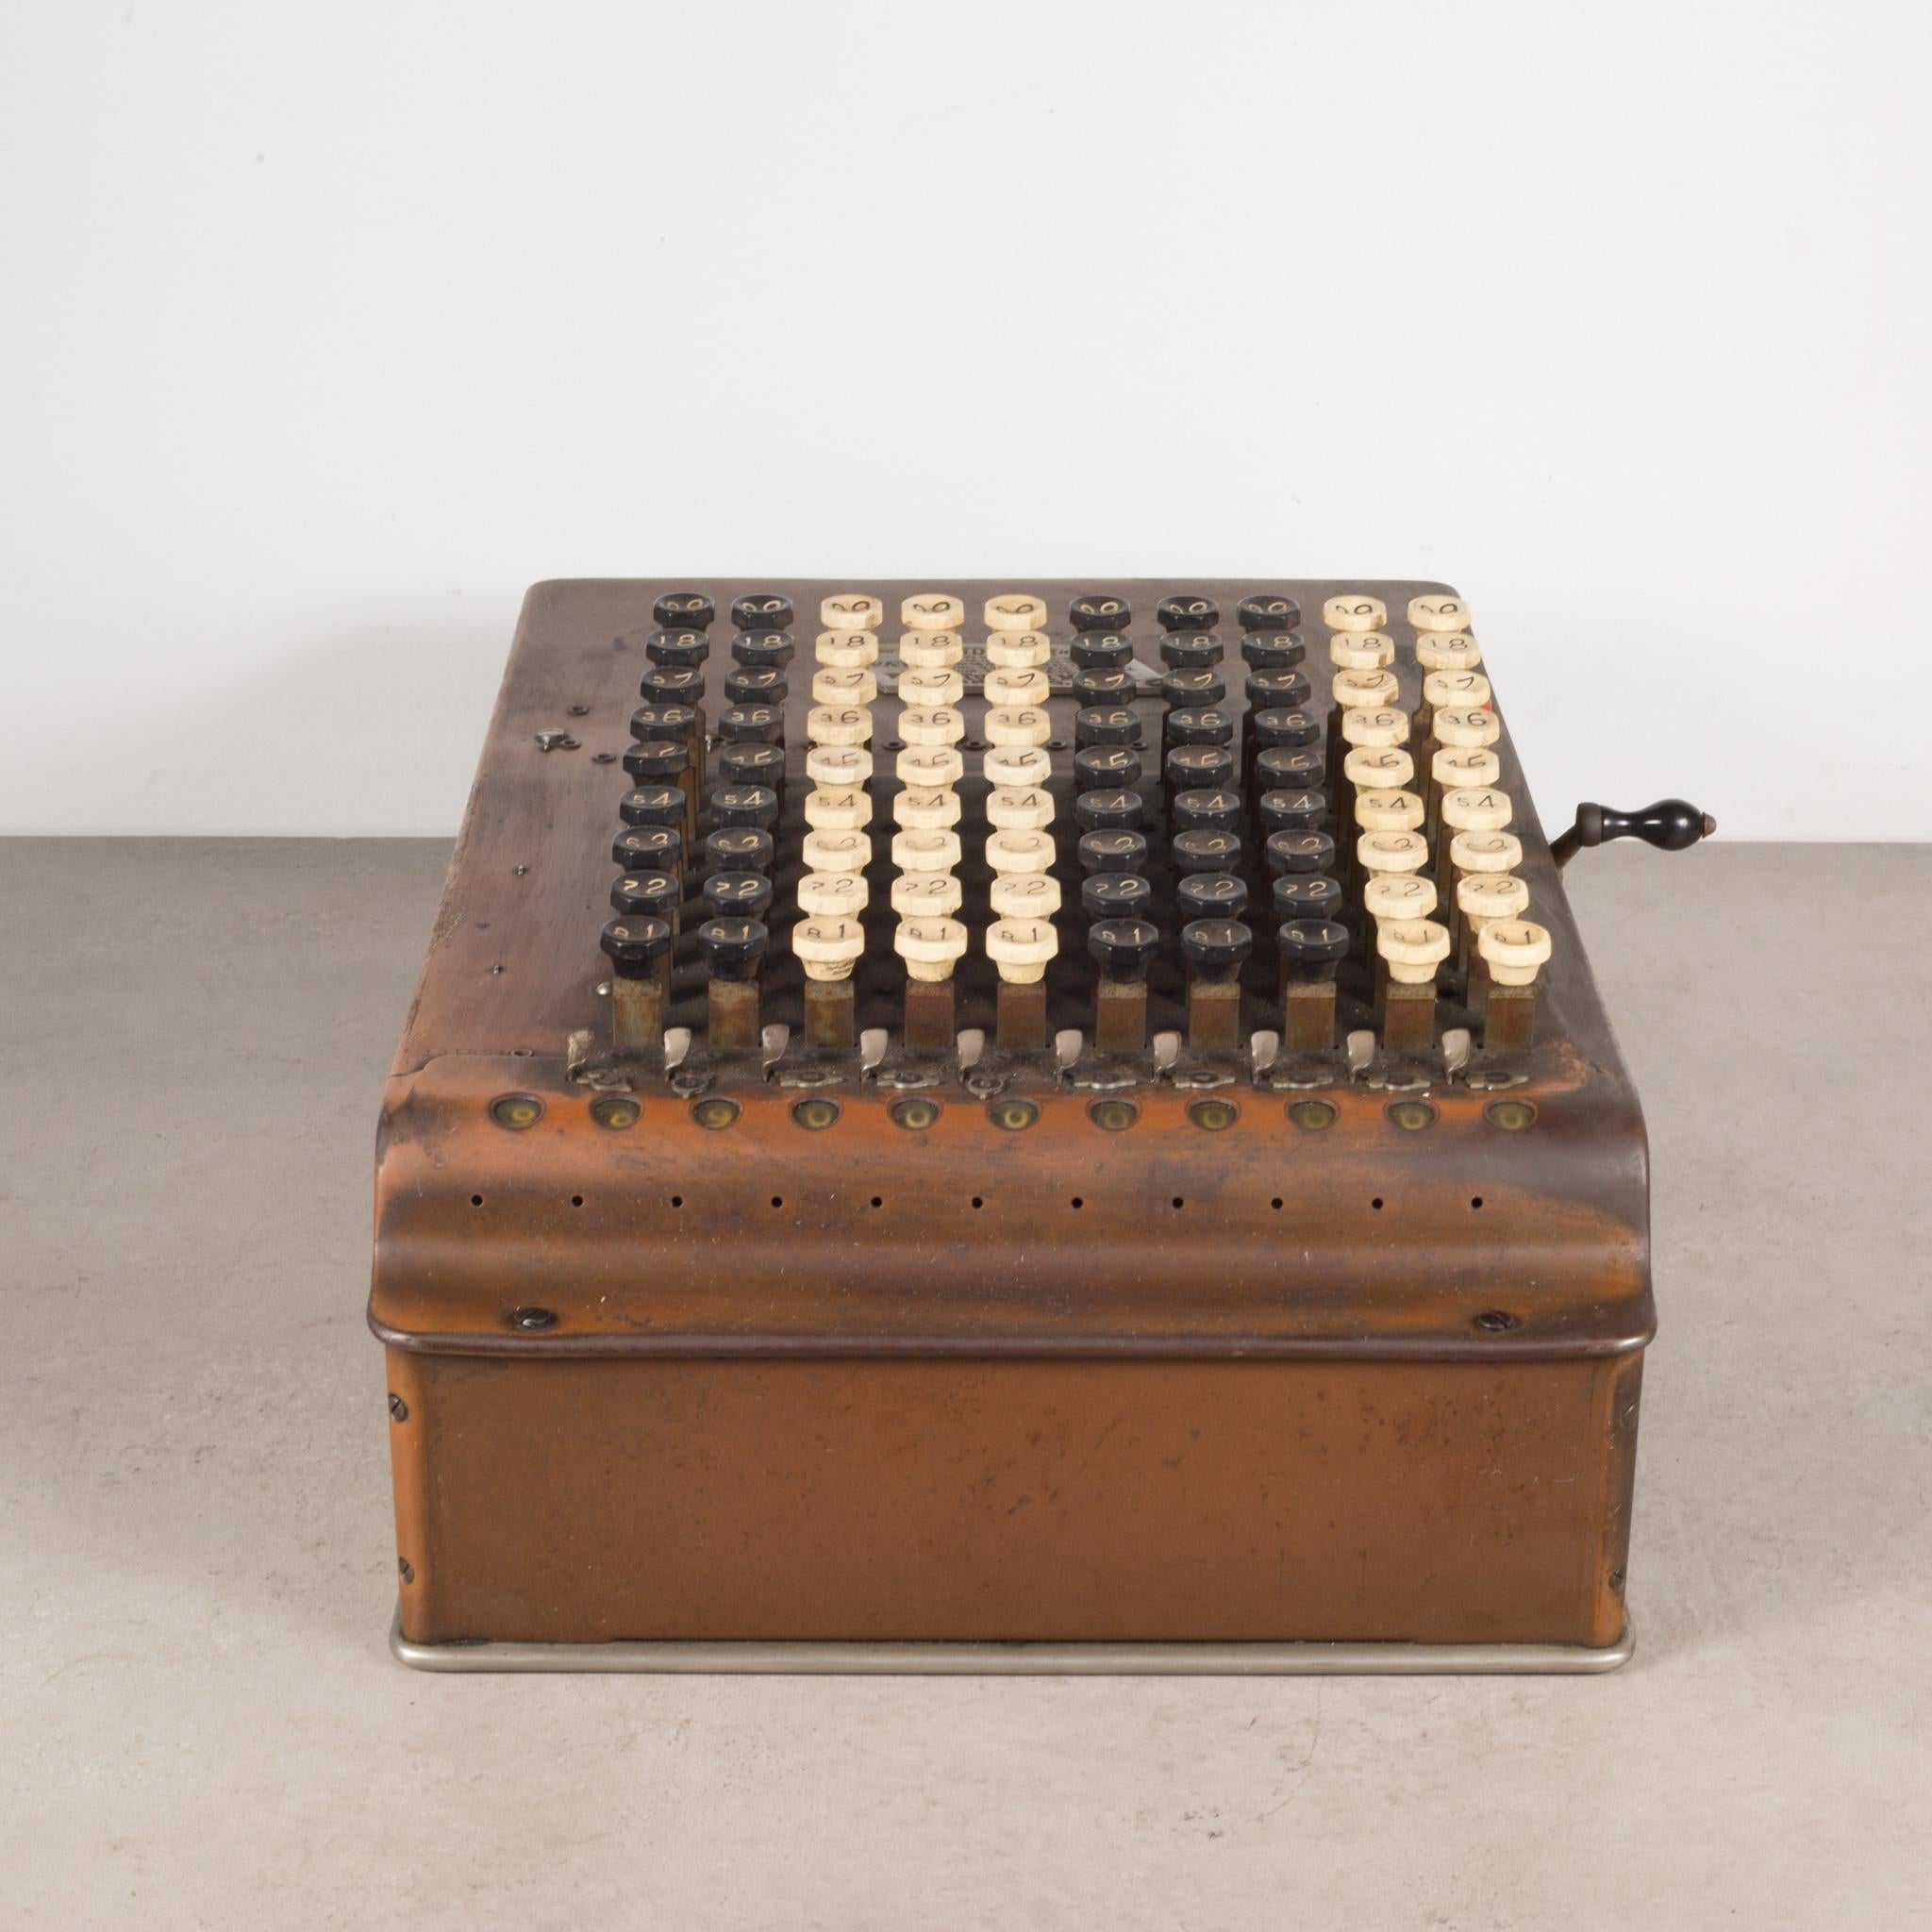 About
An antique Comptometer copper and tin adding machine with white and black Bakelite buttons and original metal manufactures tag and embossed side decorations. The lever pulls forward and back working the inner mechanisms. The piece has